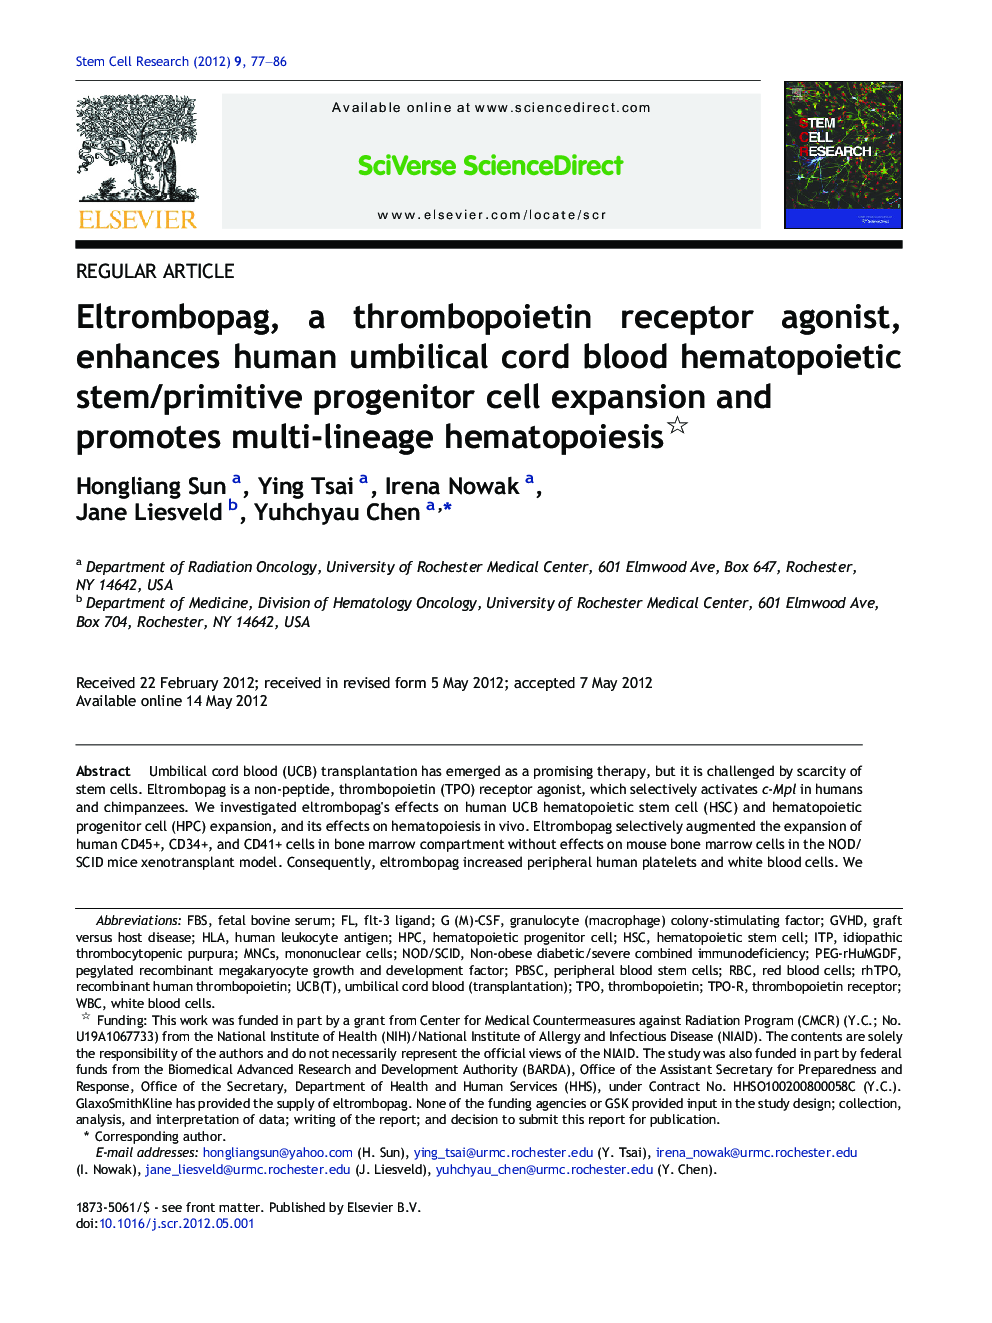 Eltrombopag, a thrombopoietin receptor agonist, enhances human umbilical cord blood hematopoietic stem/primitive progenitor cell expansion and promotes multi-lineage hematopoiesis 